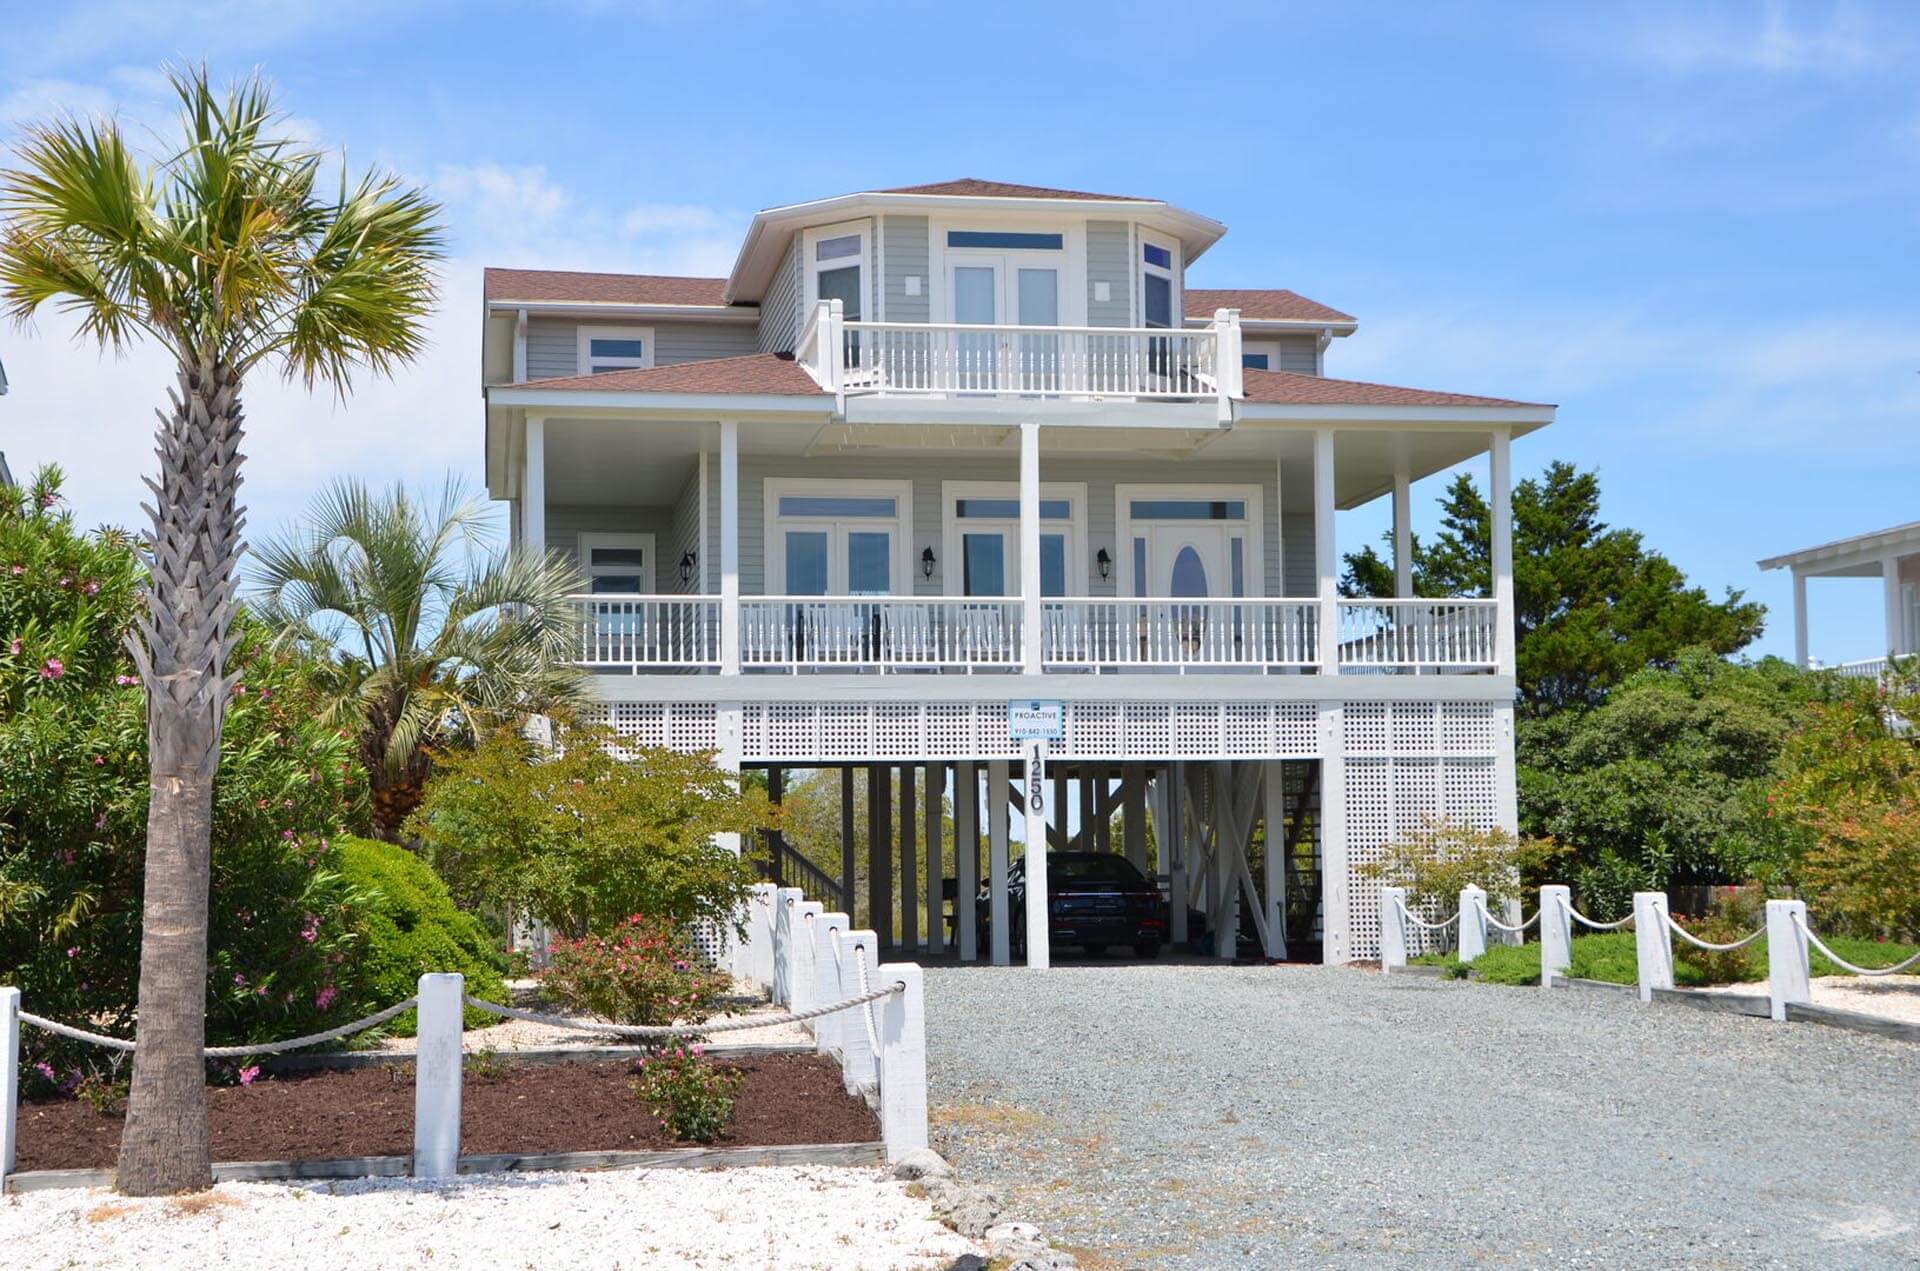 One of our Holden Beach vacation rentals